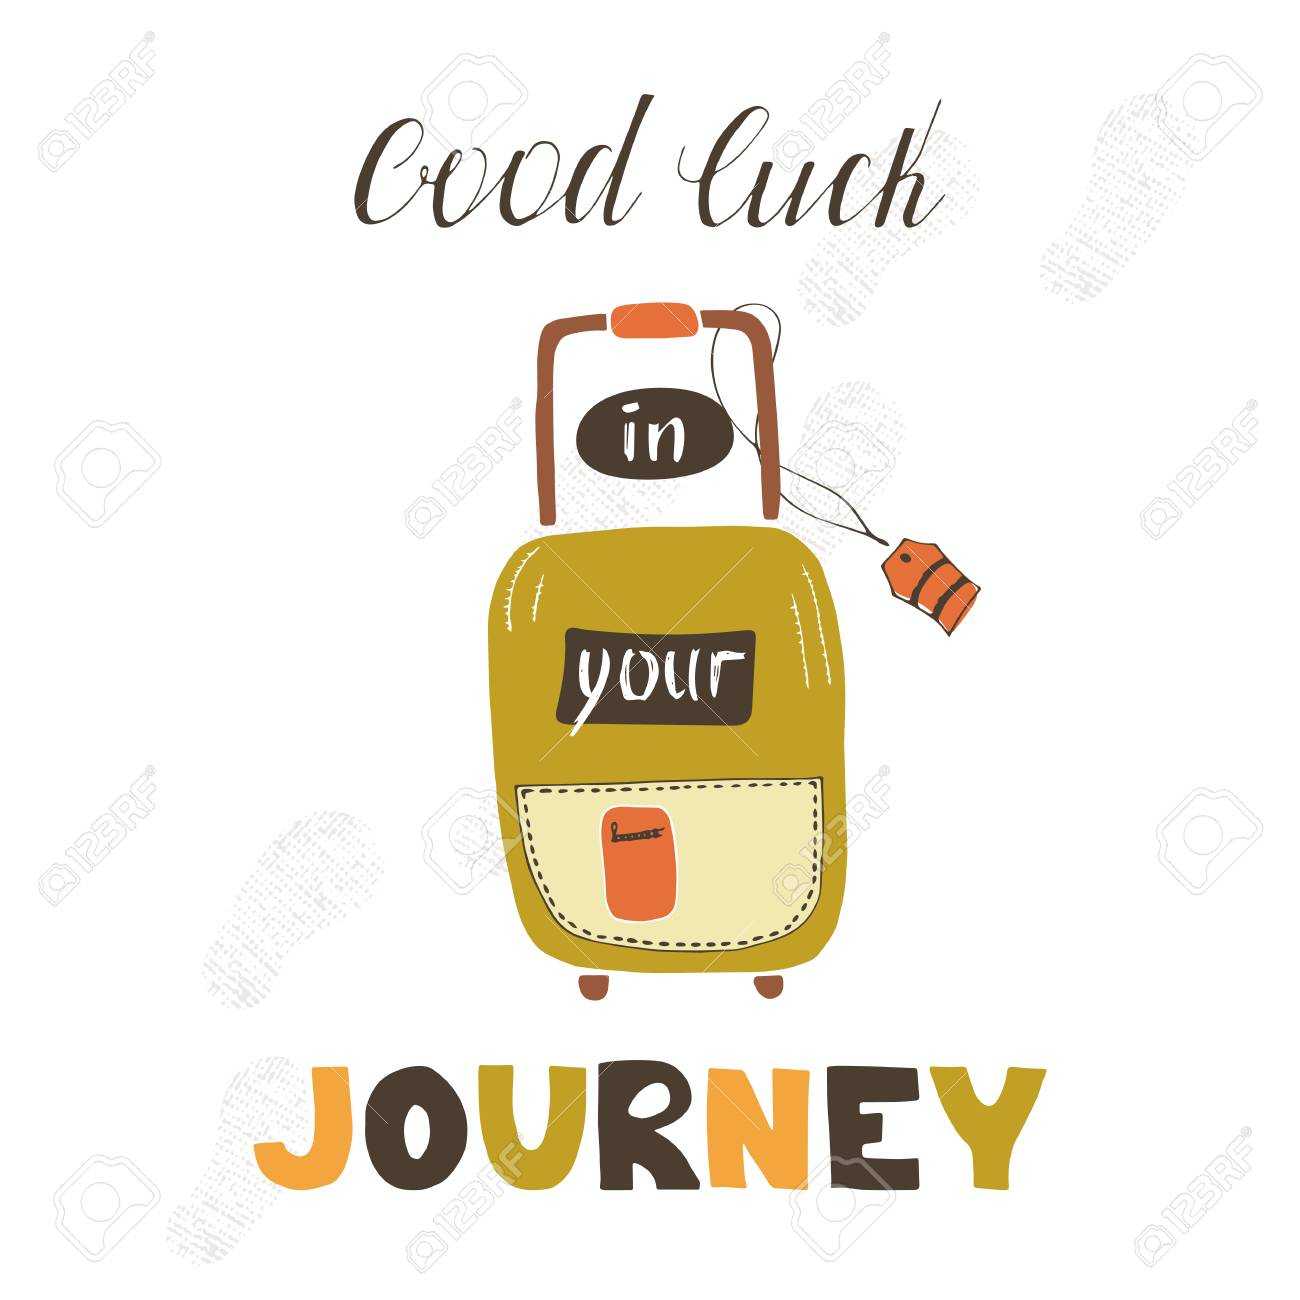 Travel Card Template With Suitcase. Greeting Postcard With Hand.. With Good Luck Banner Template